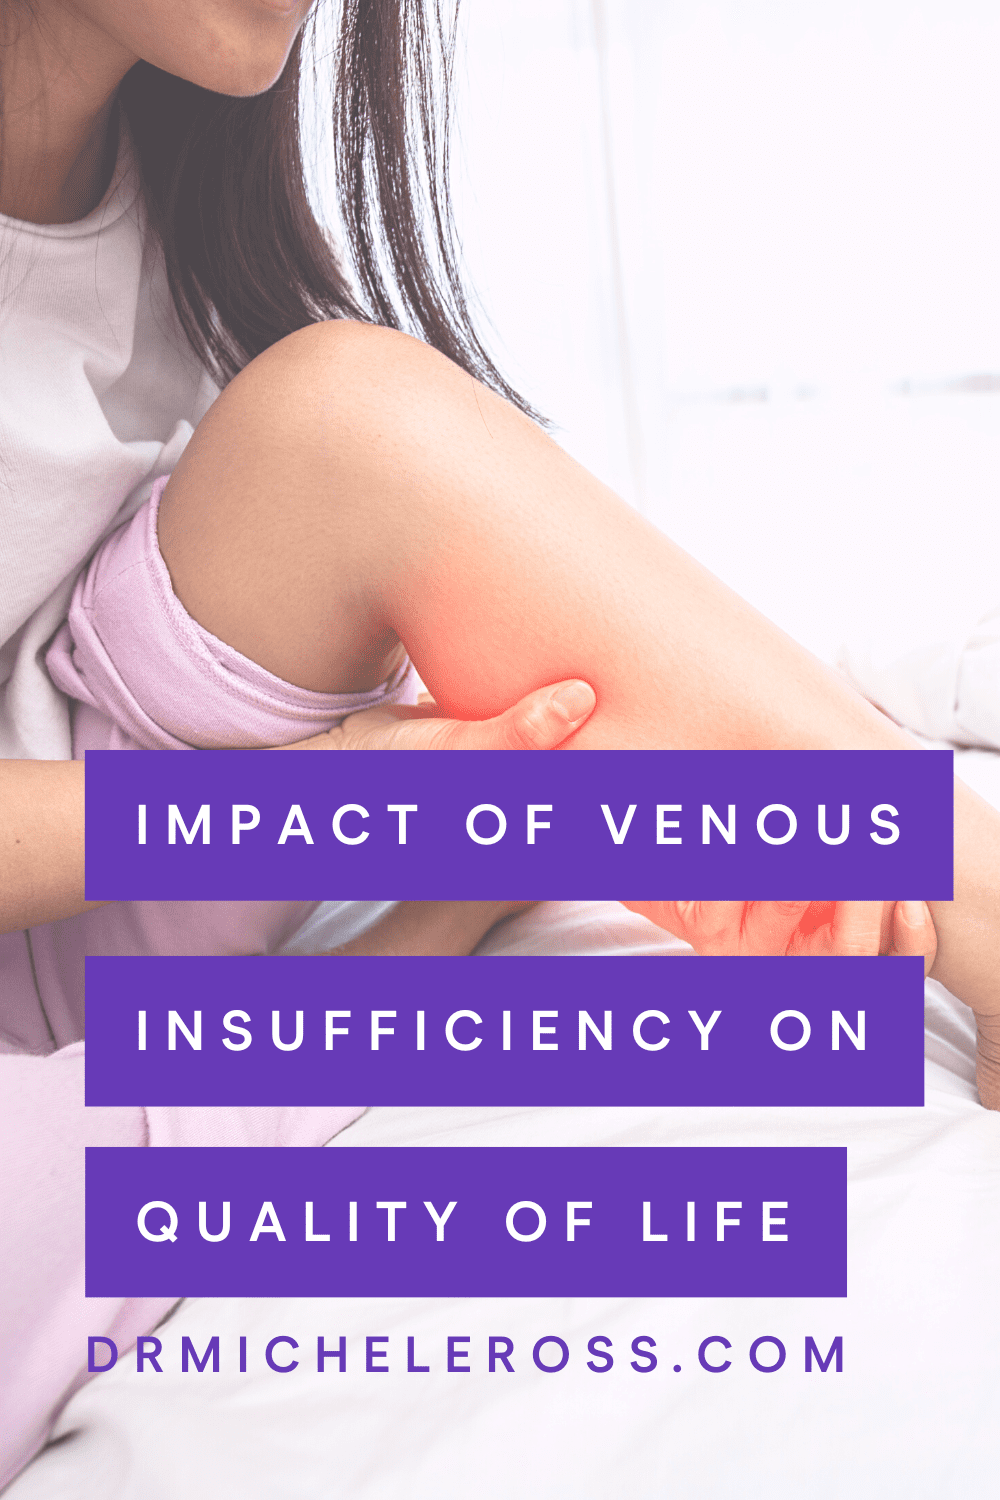 woman with poor quality of life holding painful leg with venous insufficiency